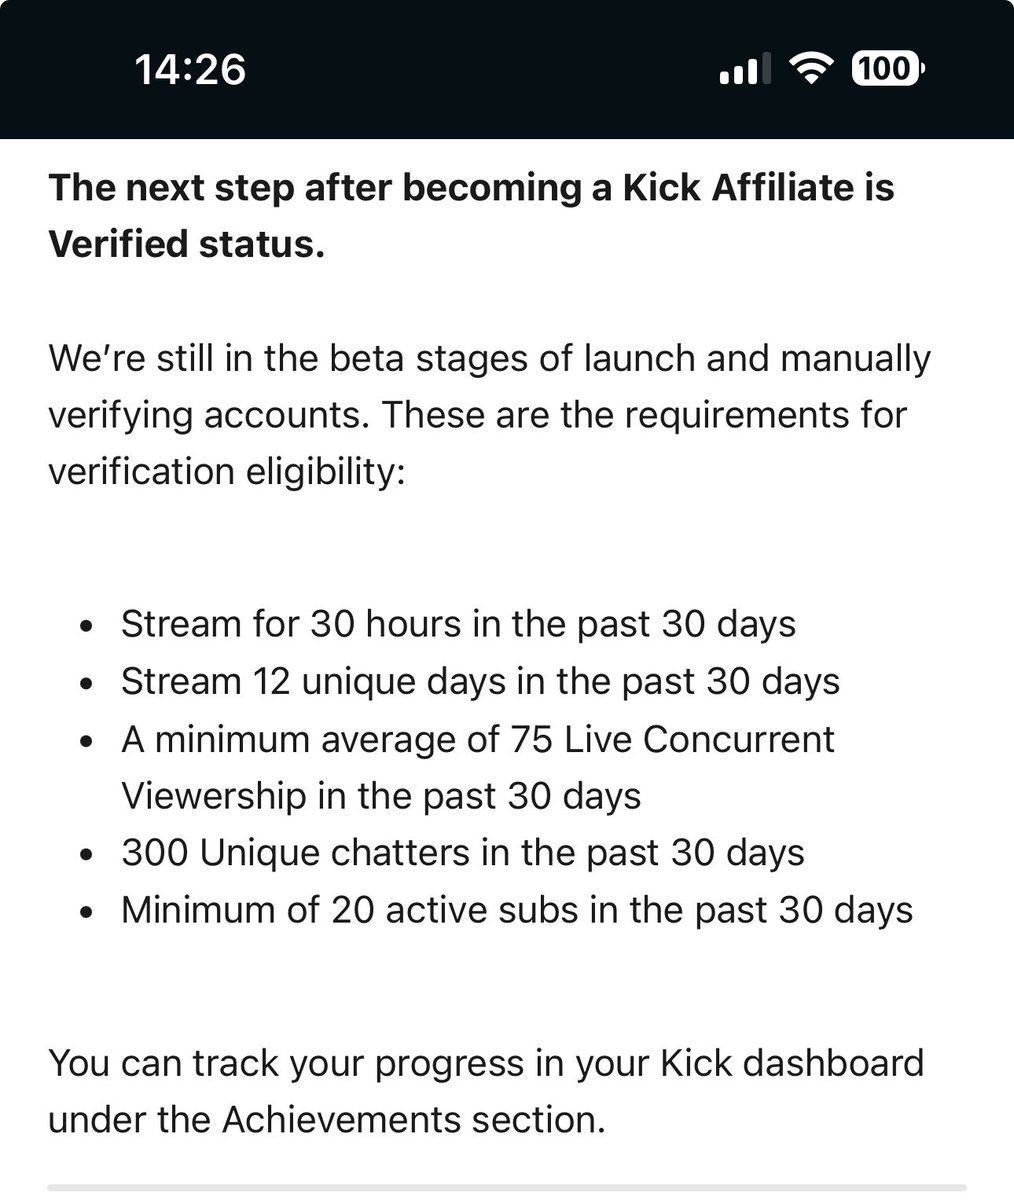 Made the choice to push for kick verified so any and all help will mean so much live daily 7pm #kick #kickverified #helpstreamers #ContenCreator #KickAffiliate #grow